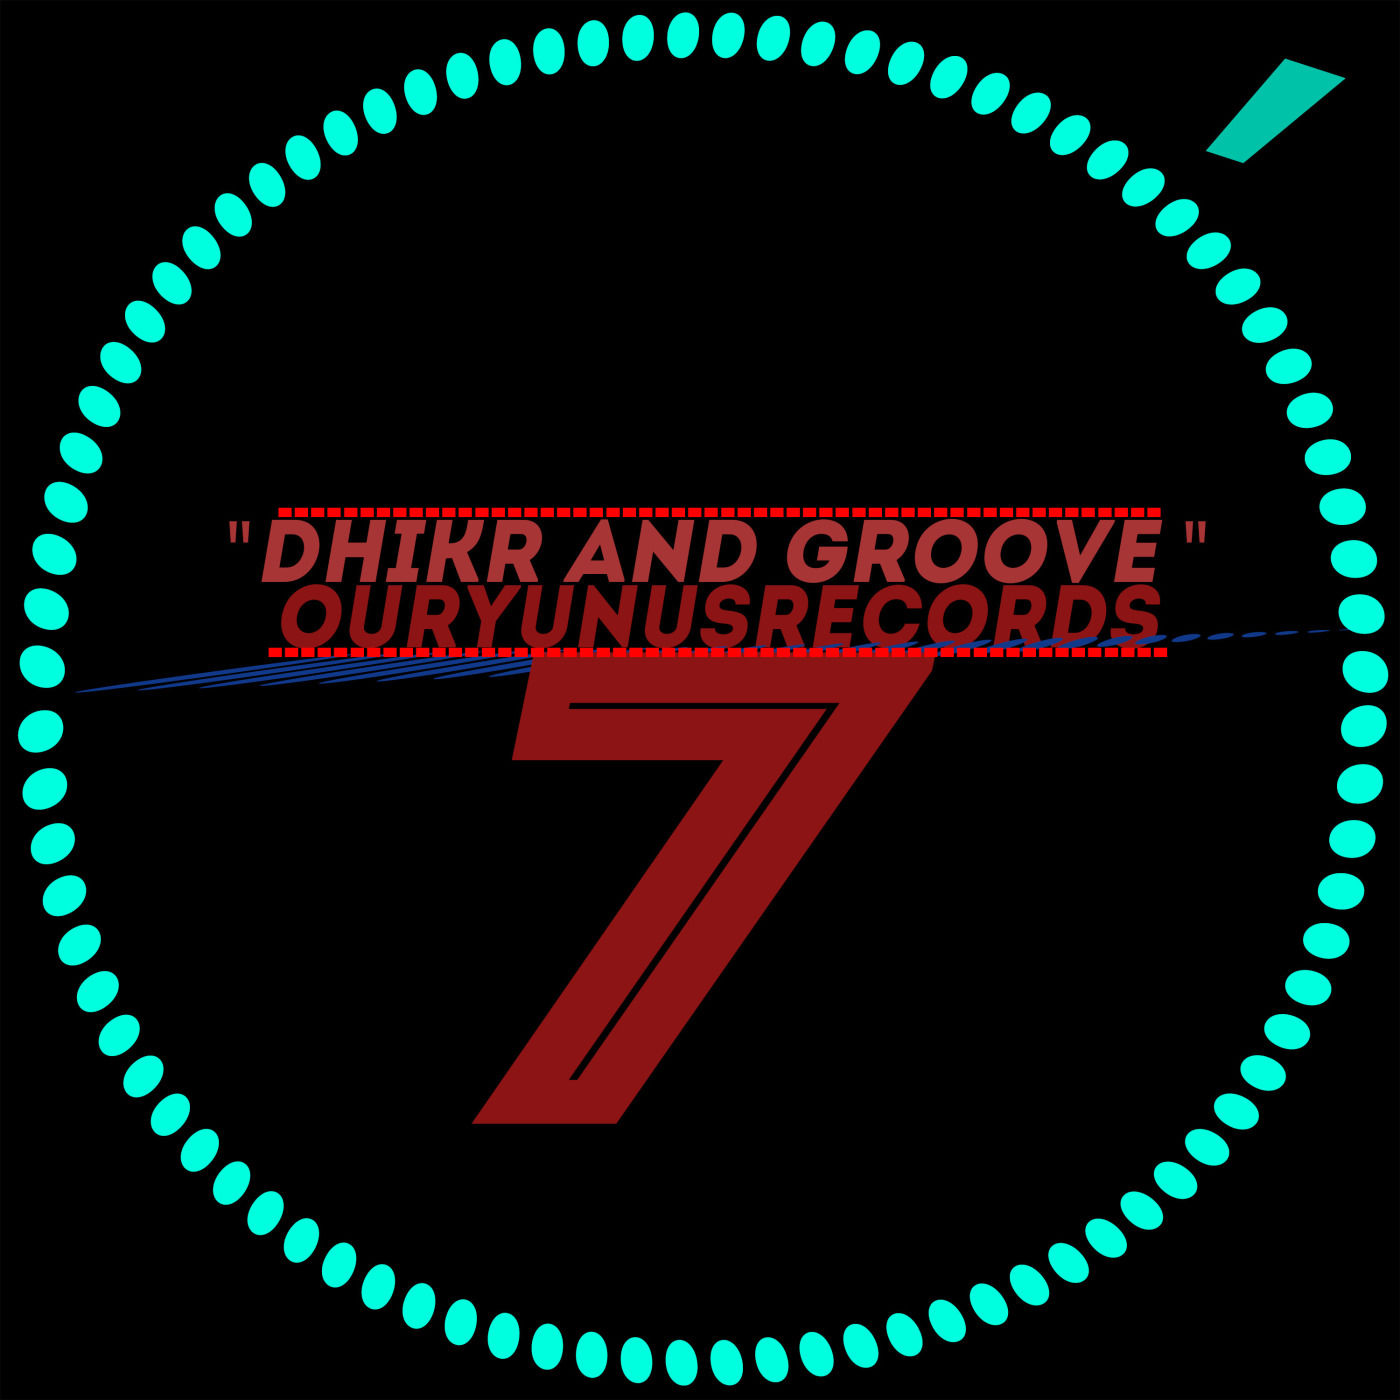 Jonasclean - Dhikr and Groove 7 / Our Yunus Records